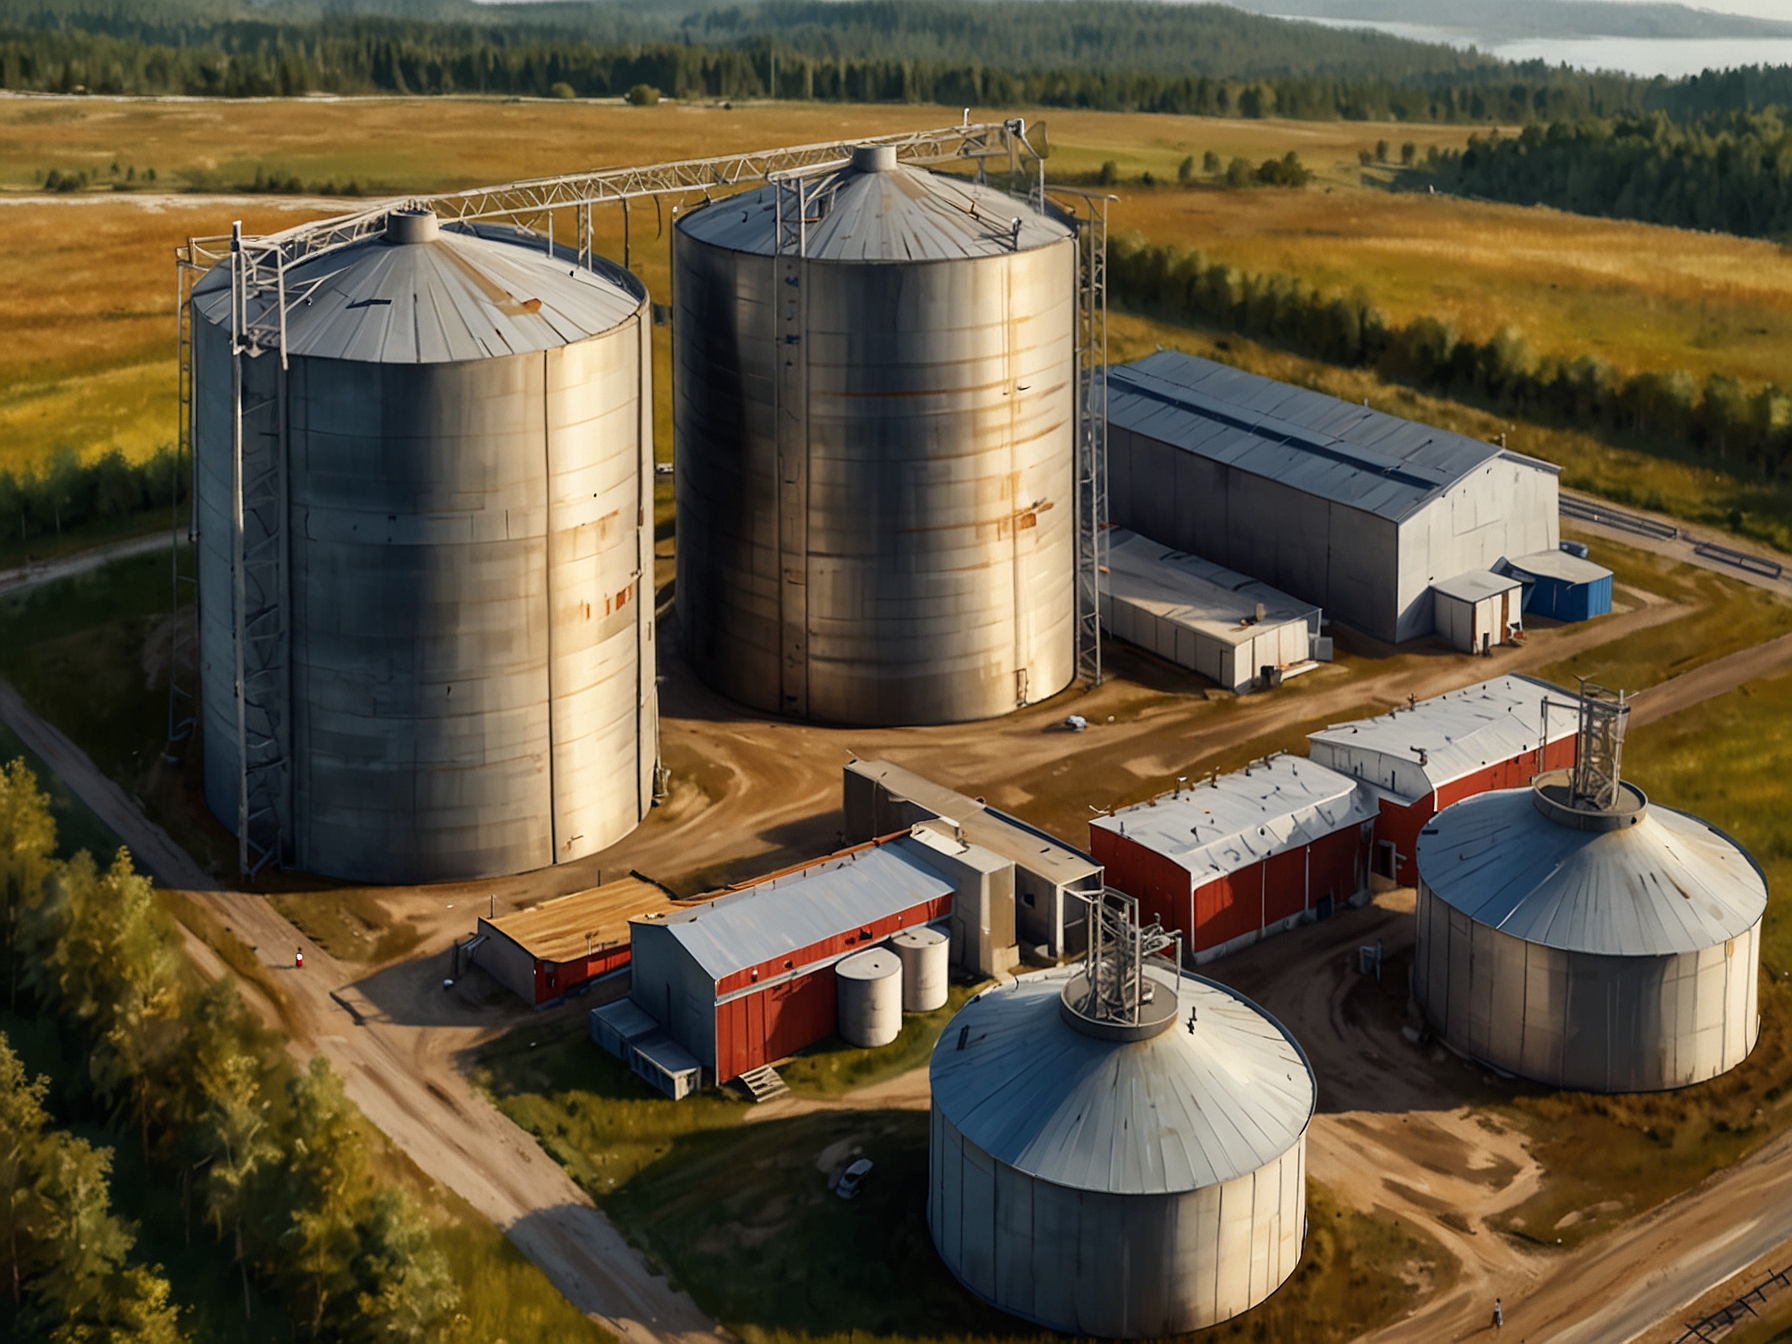 Aerial view of silos storing grain, representing Norway's initiative to build food reserves. The image highlights the importance of having sufficient storage facilities.